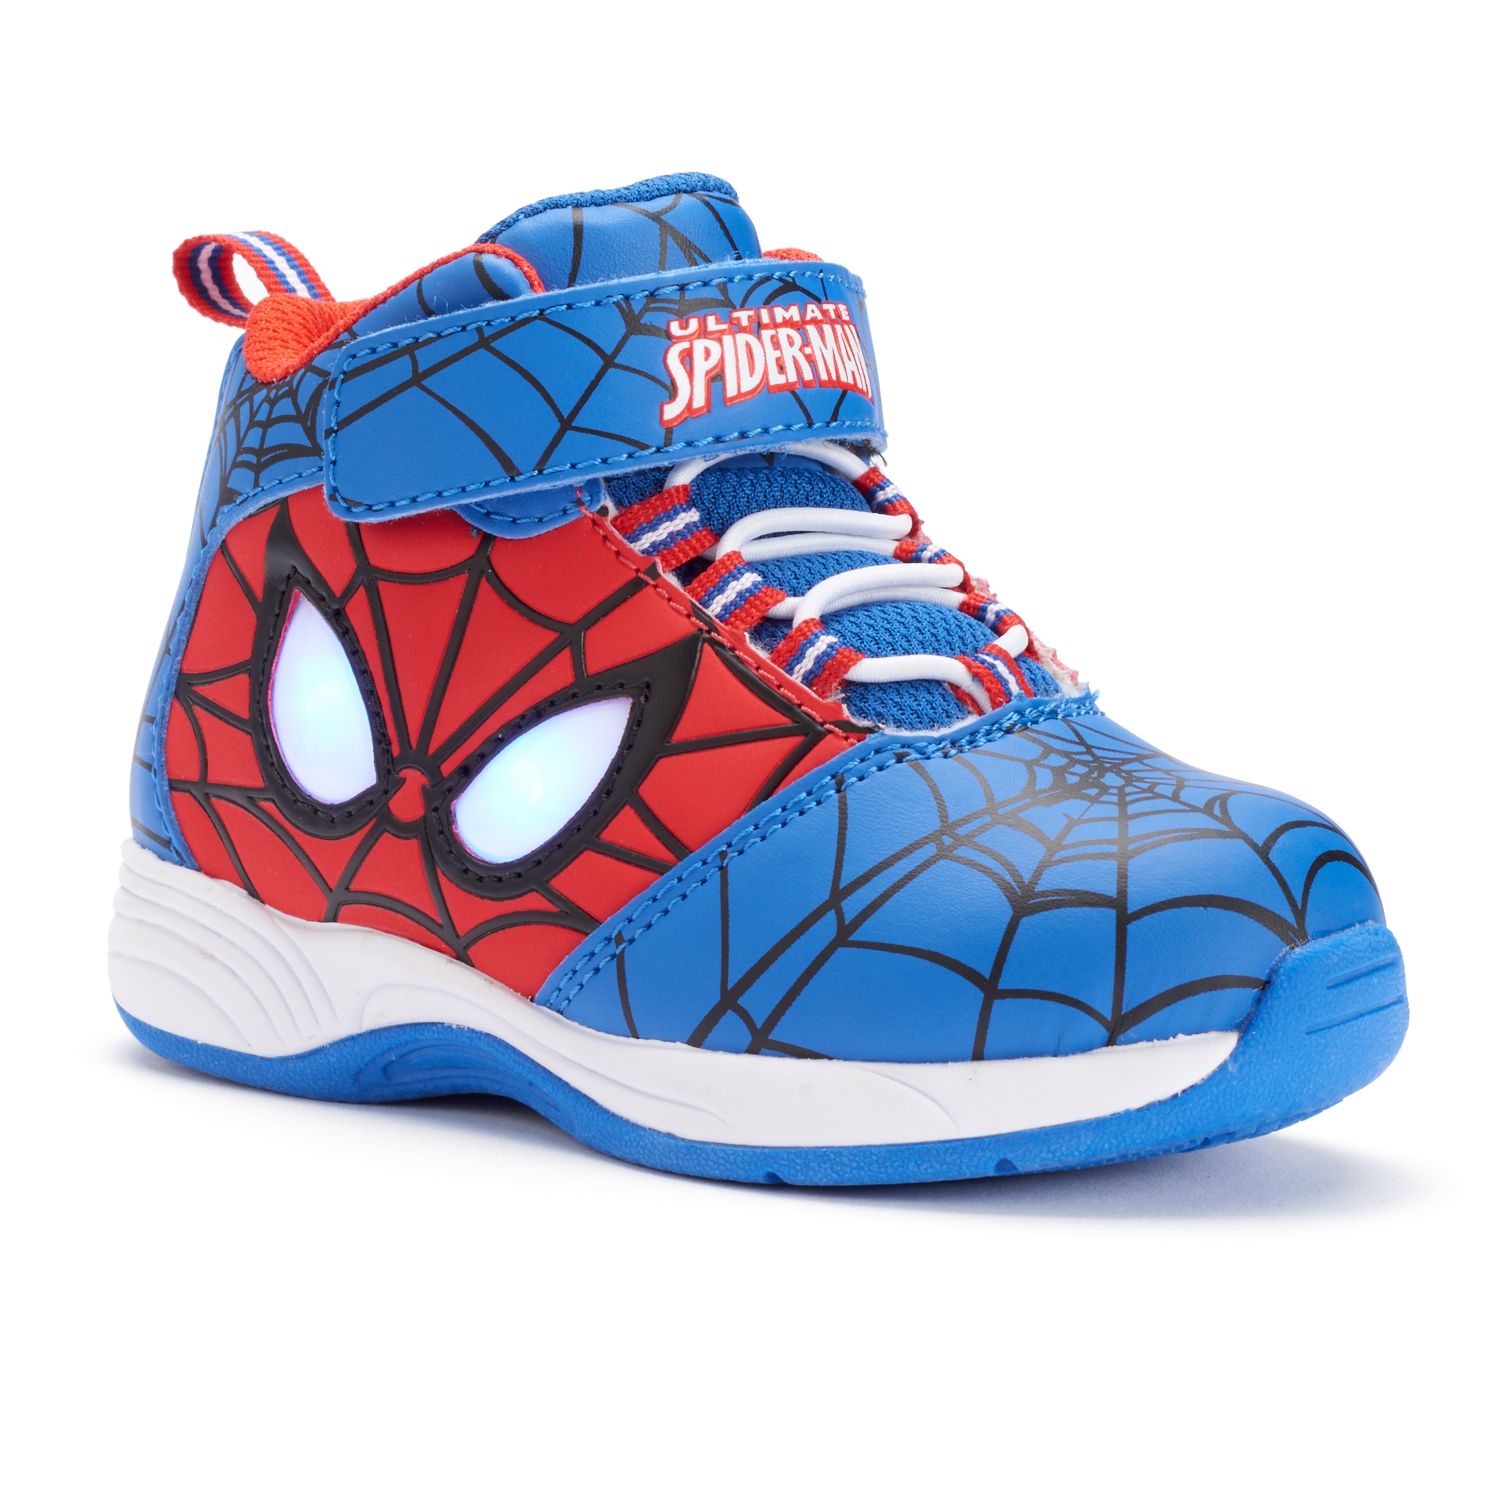 spider man shoes basketball